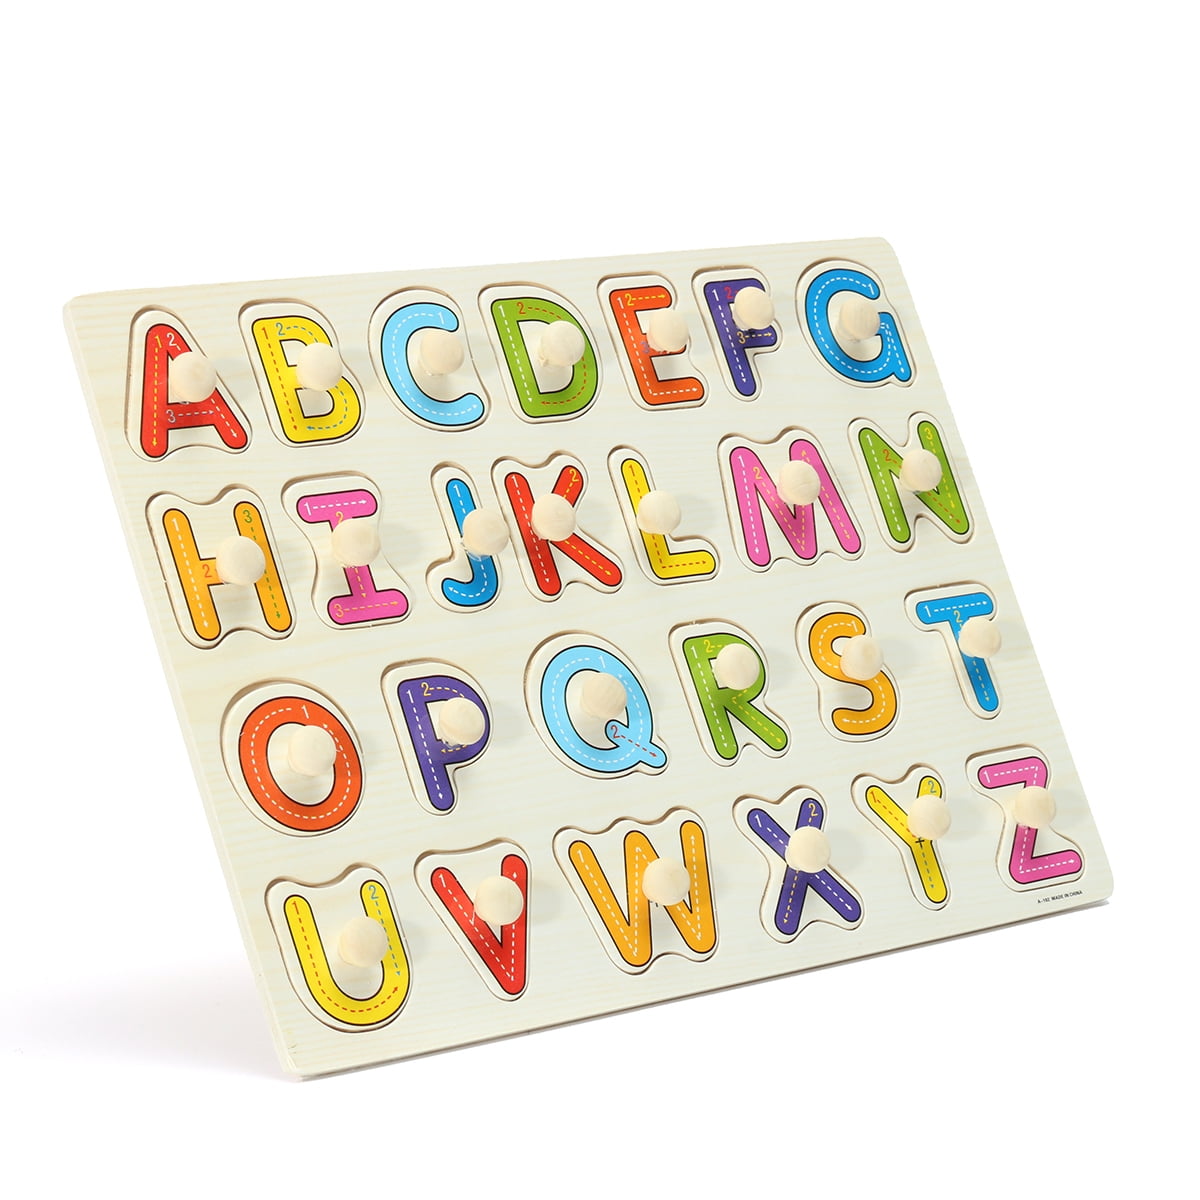 Wooden Alphabet ABC Jigsaw Learning Educational Puzzle Children Kid Toys S8N9 